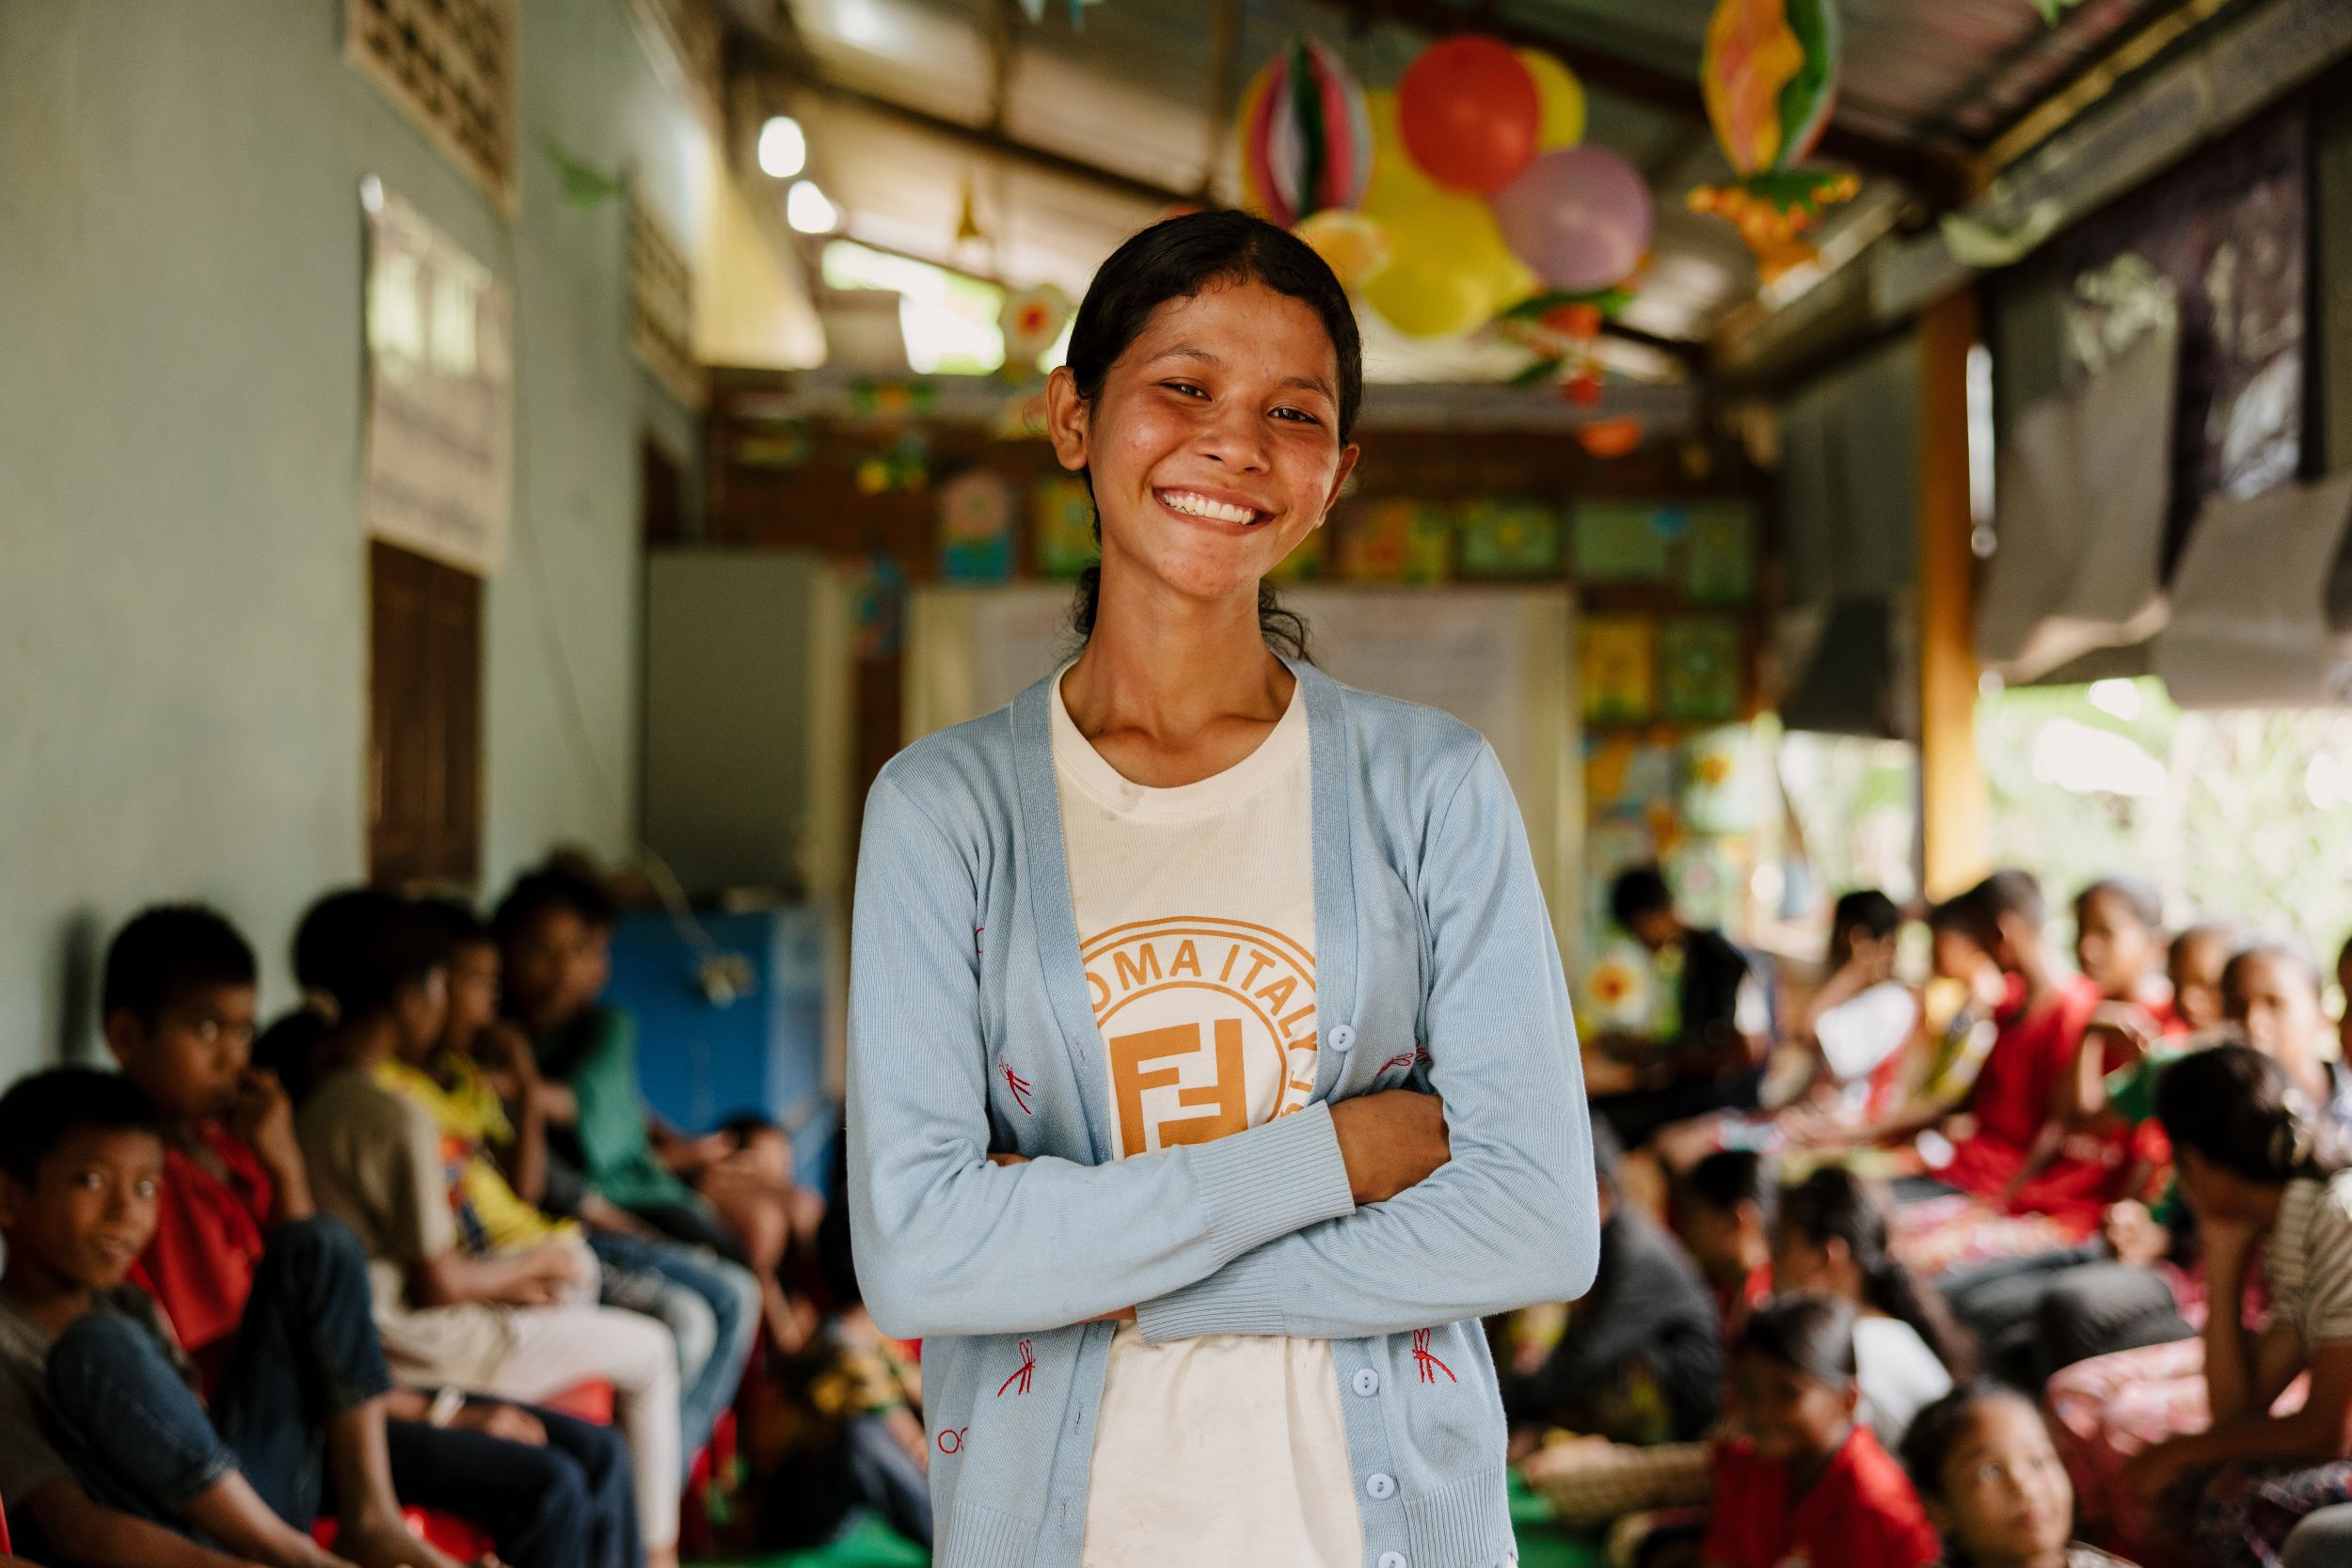 18-year-old Cambodian girl smiling for camera